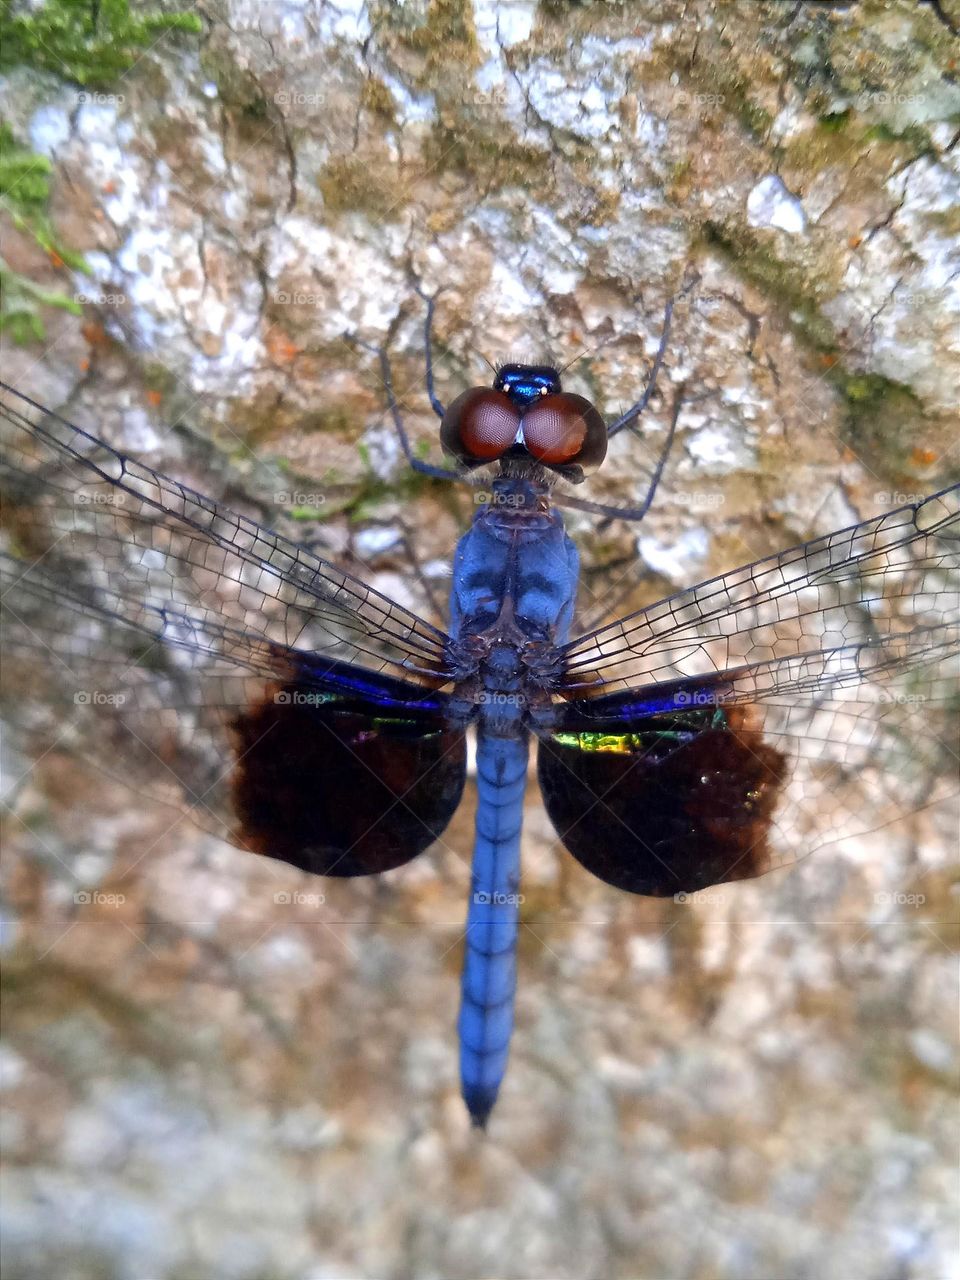 A blue dragonfly on the tree trunk.